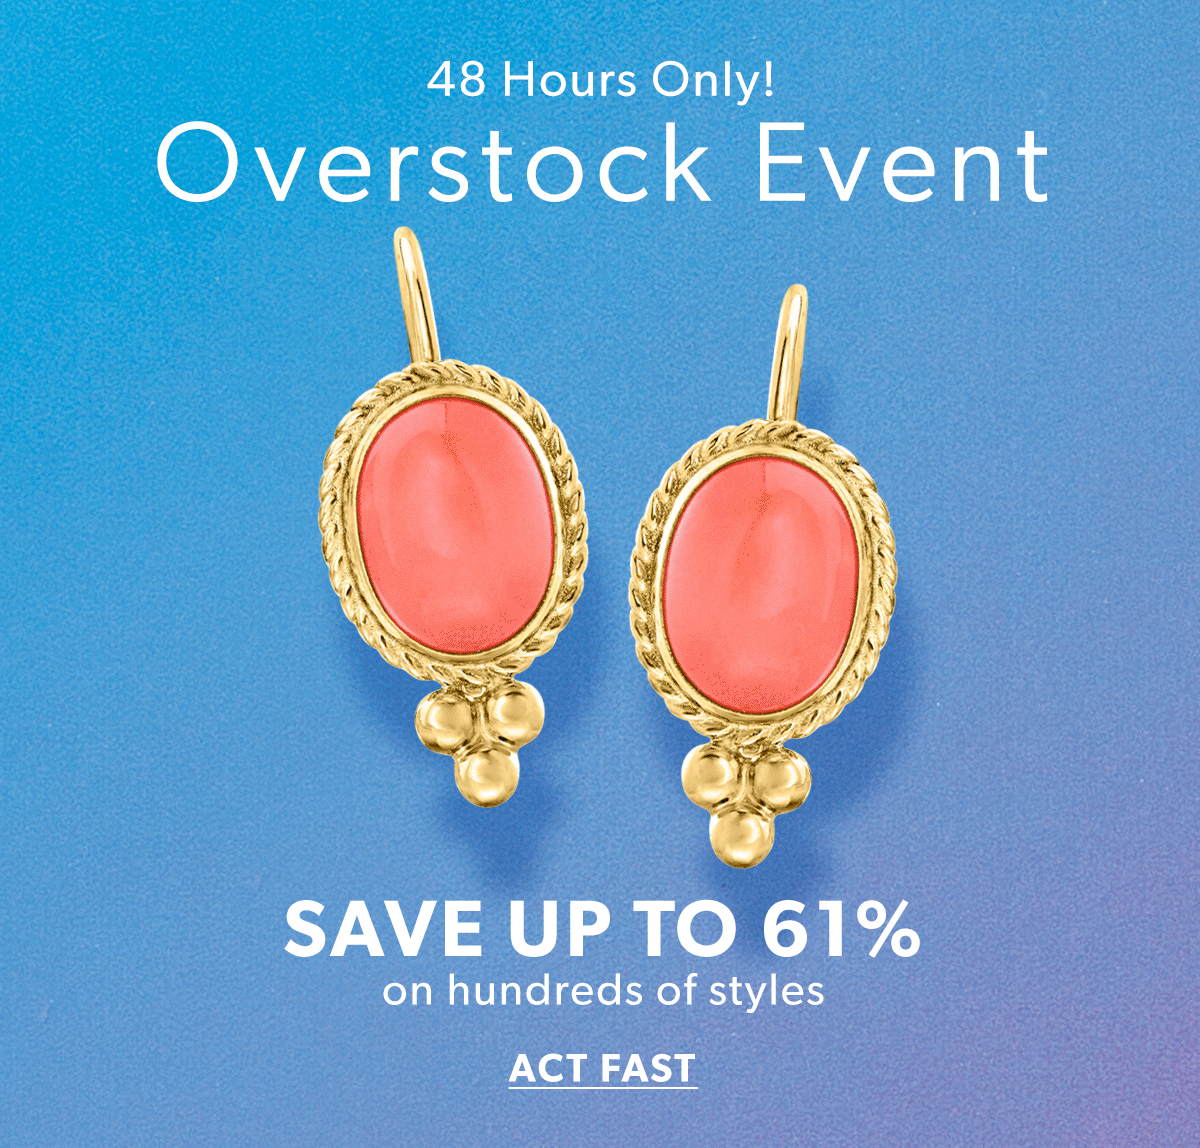 Overstock Event. Save Up To 61% on Hundreds of Styles. Act Fast